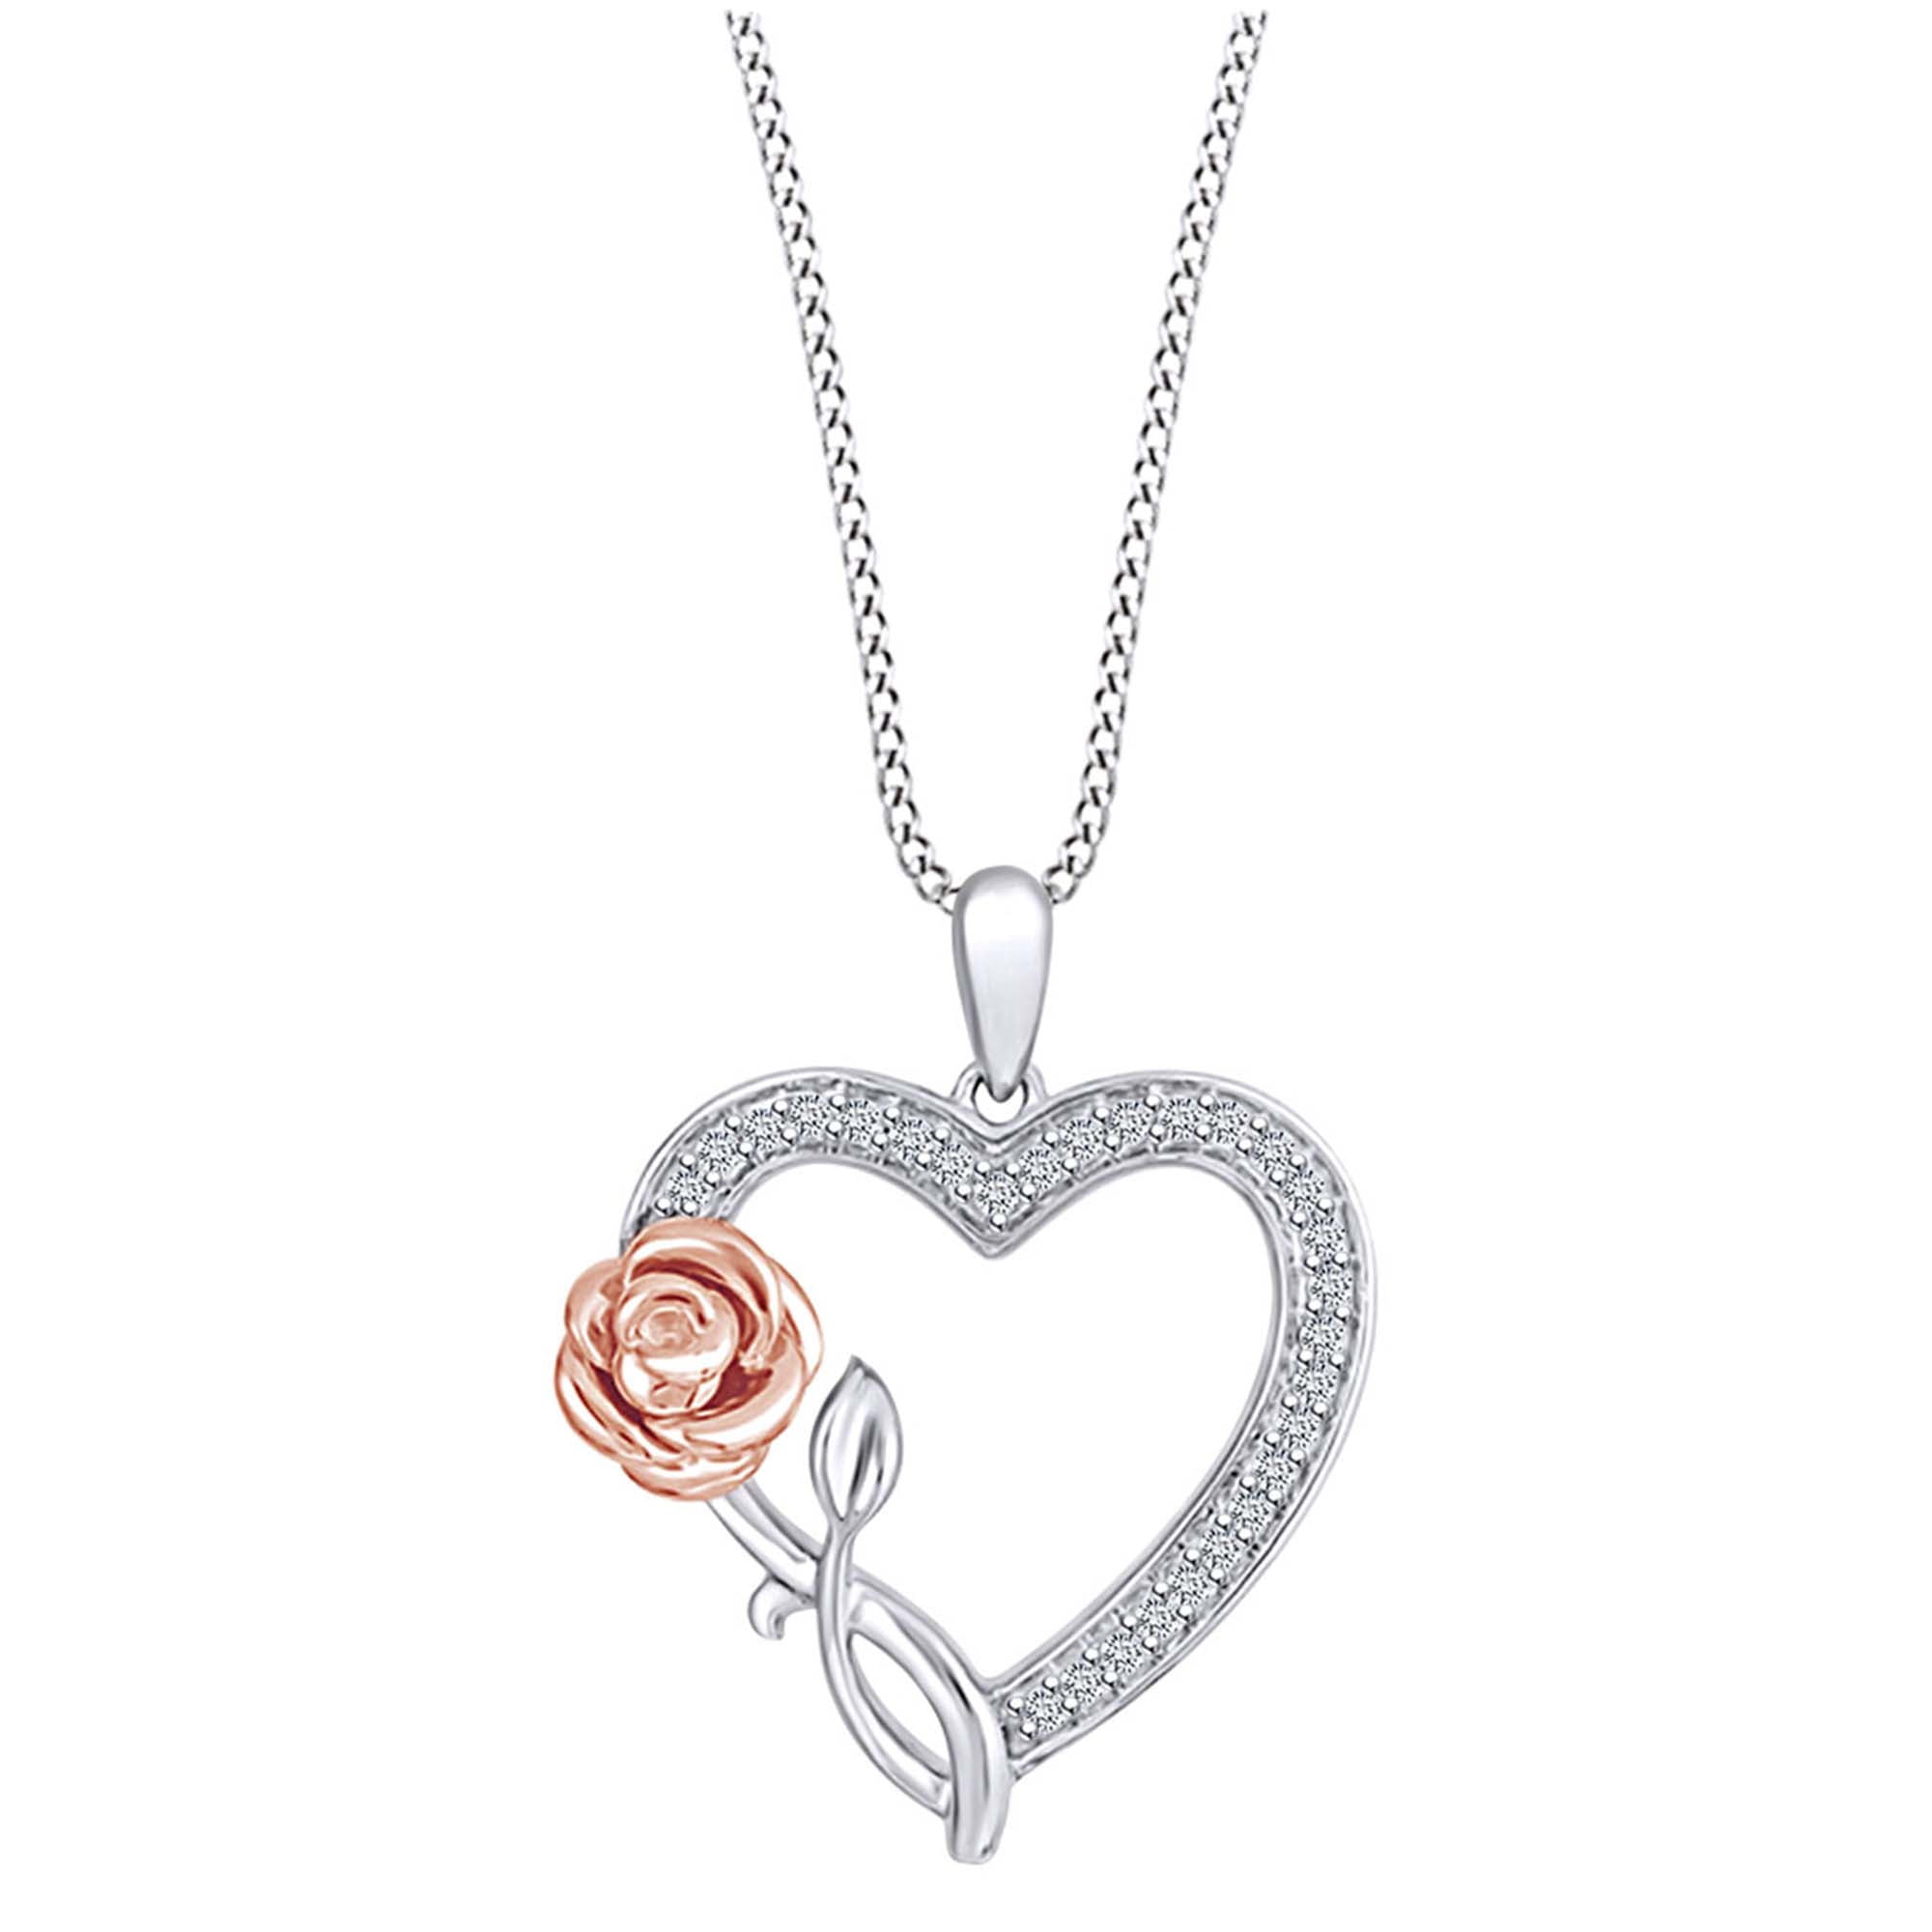 Rose gold necklace in 7 colours with earrings